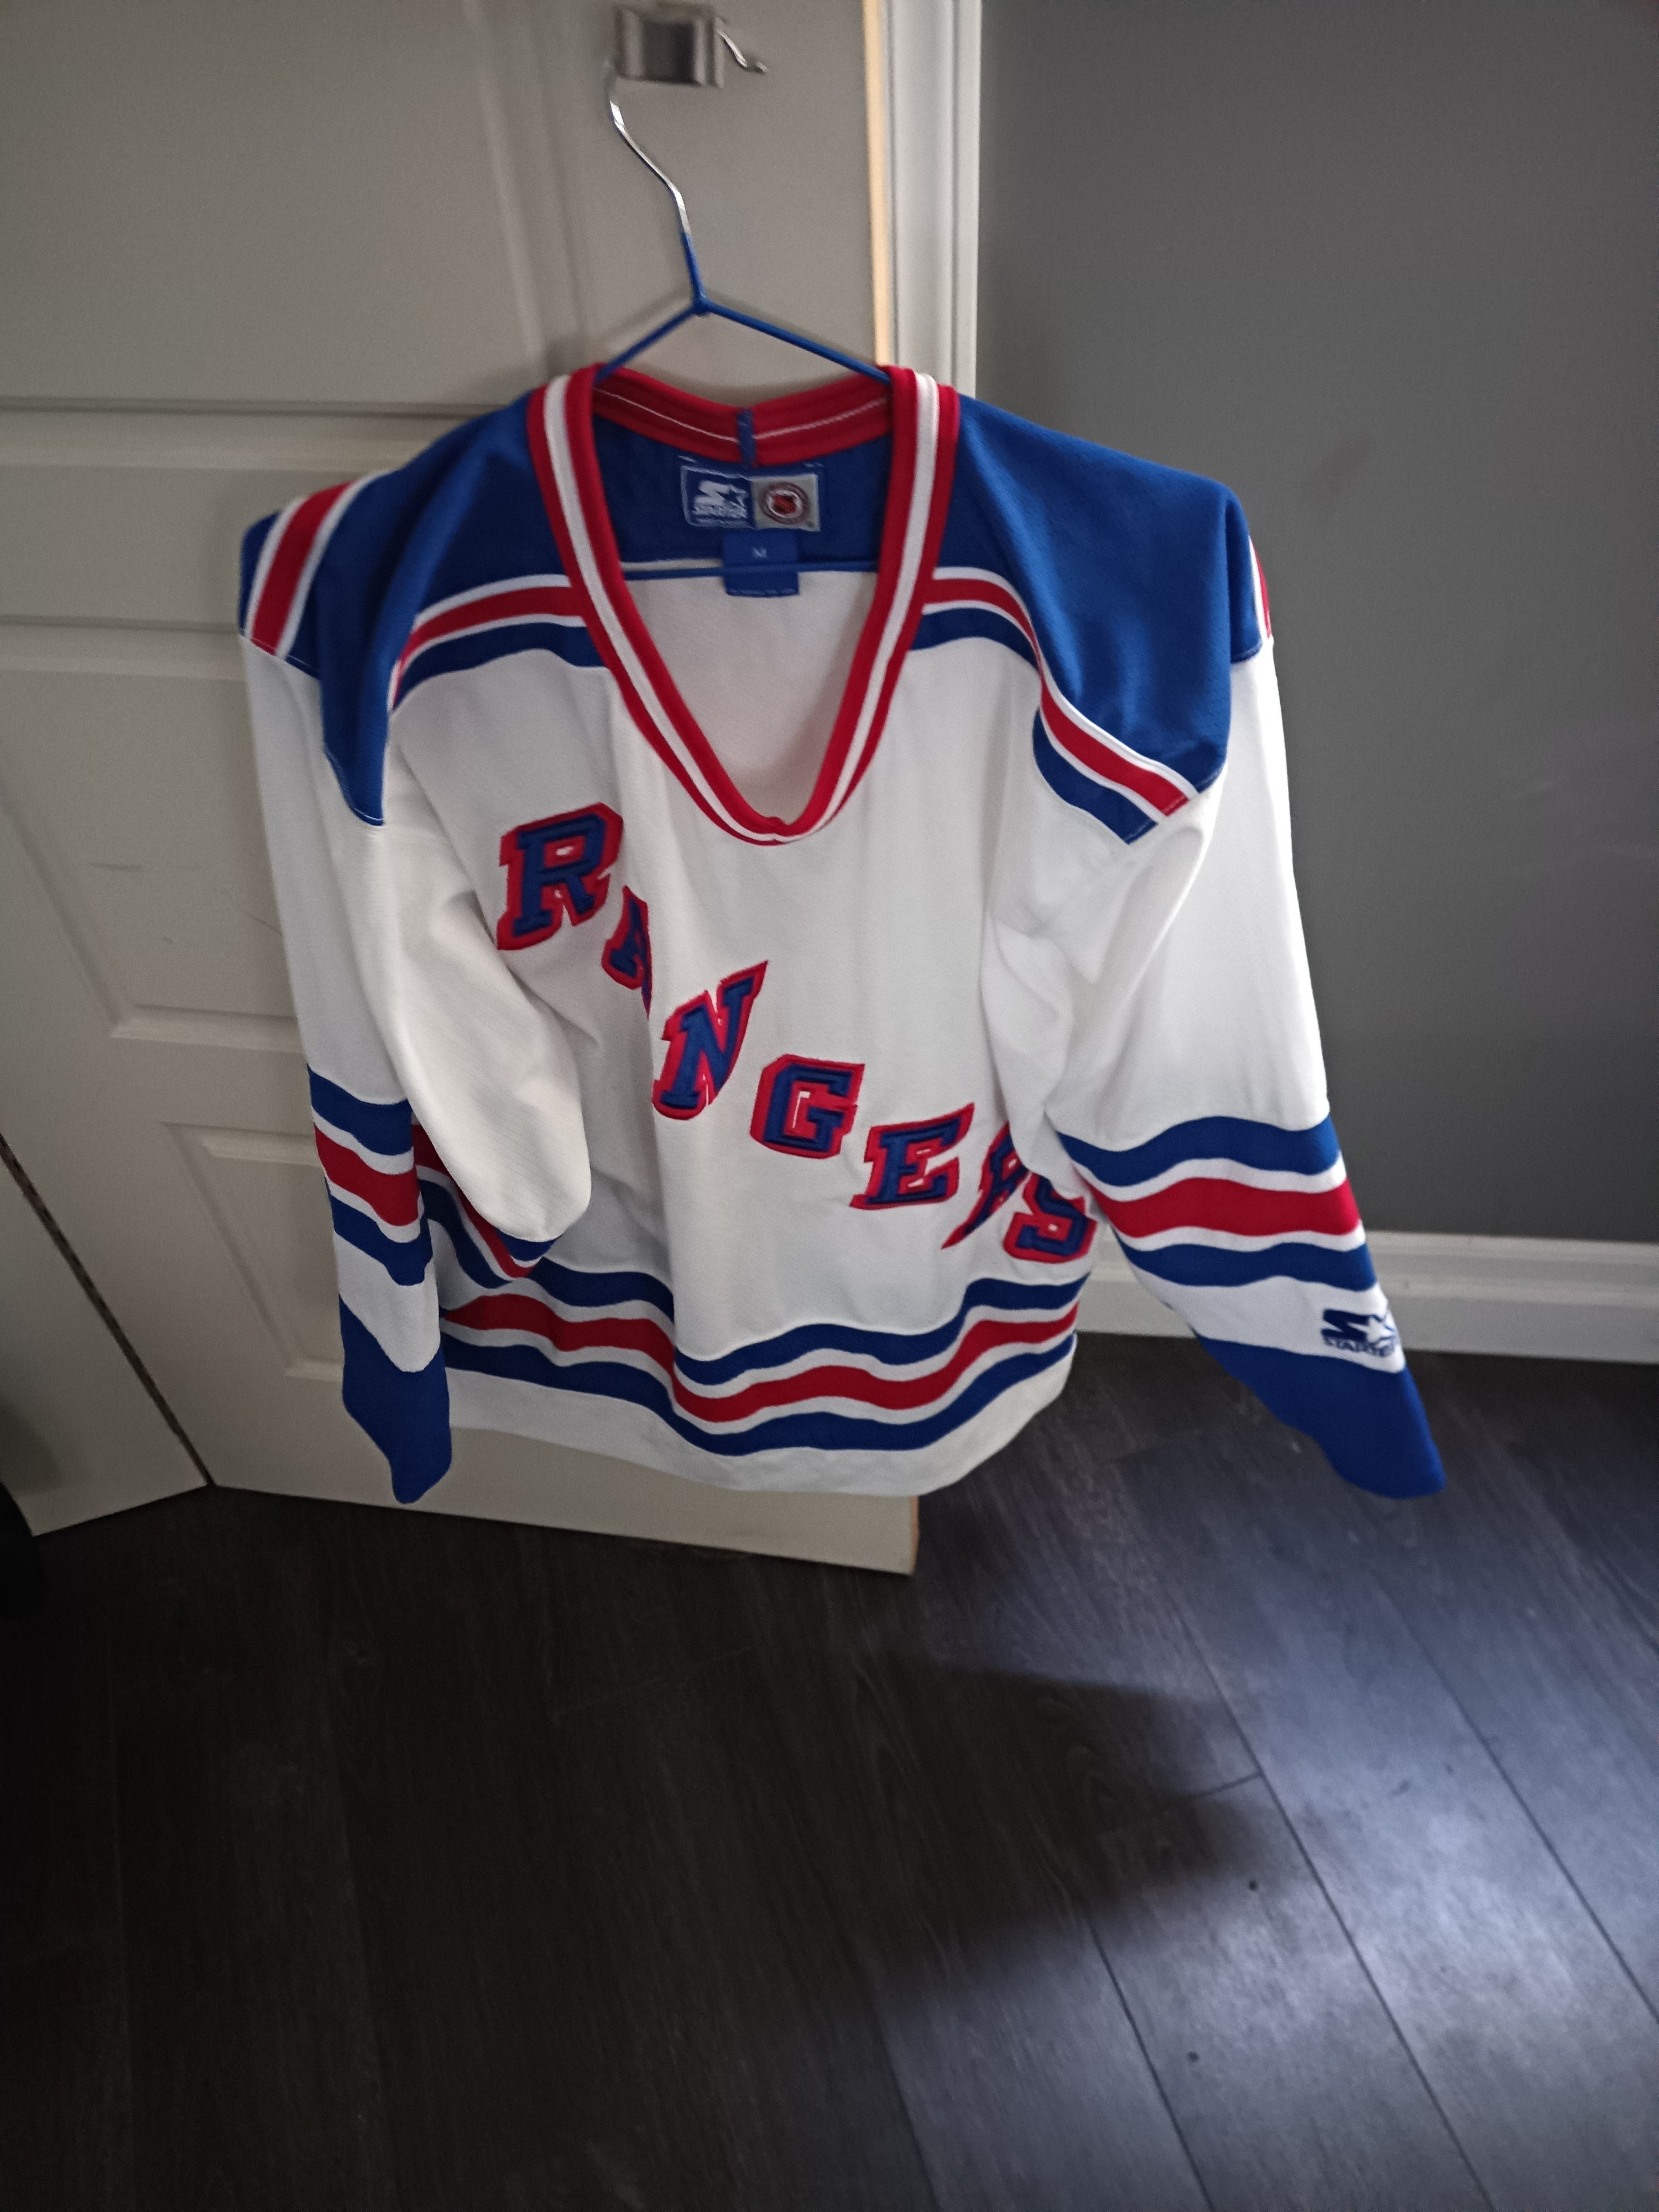 One of the best NY Rangers jerseys on the planet 🌏🗽 Early 00's Mark  Messier New York Rangers Lady liberty CCM NHL jersey Size Medium…